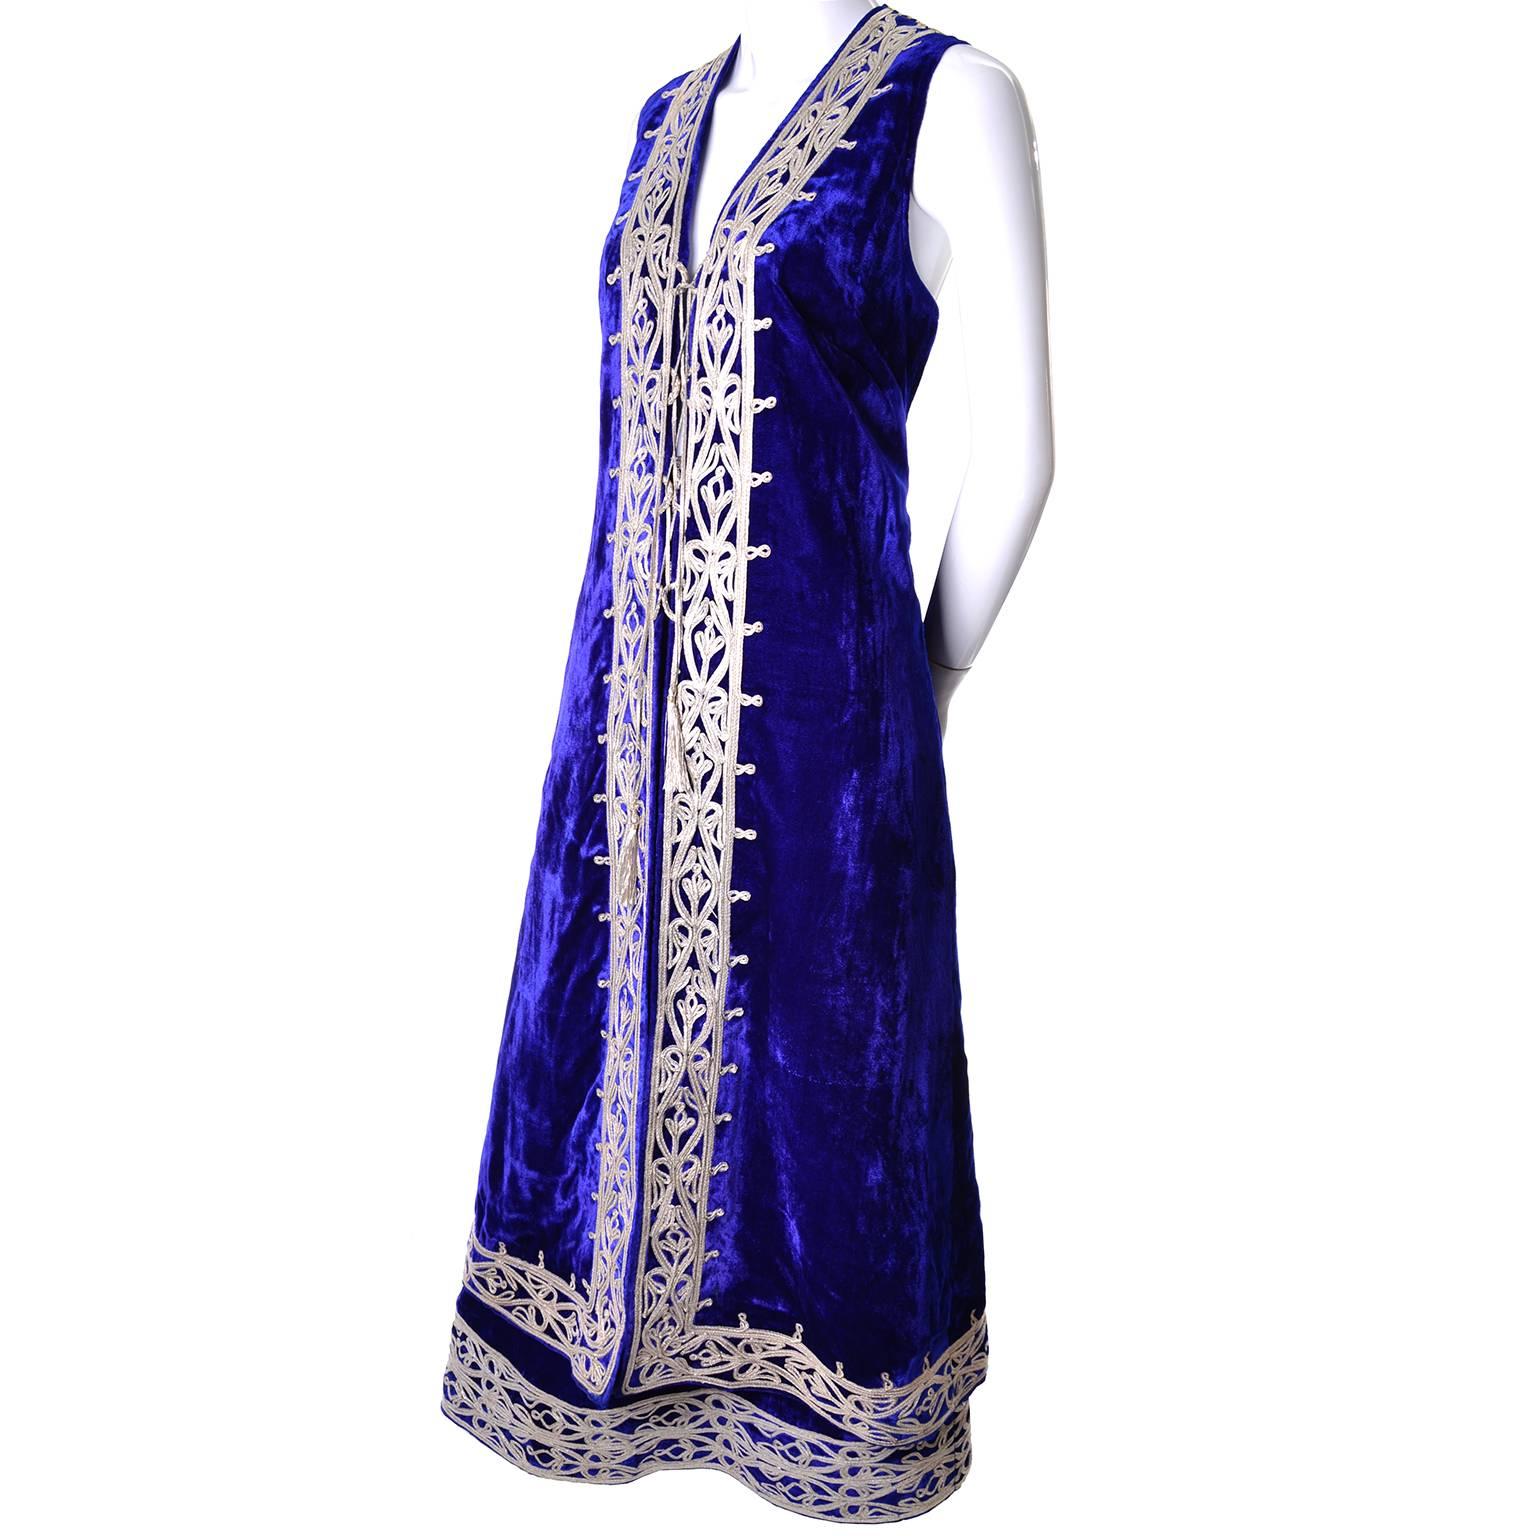 This is an outstanding royal blue velvet 2 piece vintage Afghan skirt and sleeveless waistcoat or vest outfit. The outfit has Pashtun style silvery gold braid embroidery that wraps around the waist and the hem of the skirt. The skirt and top are